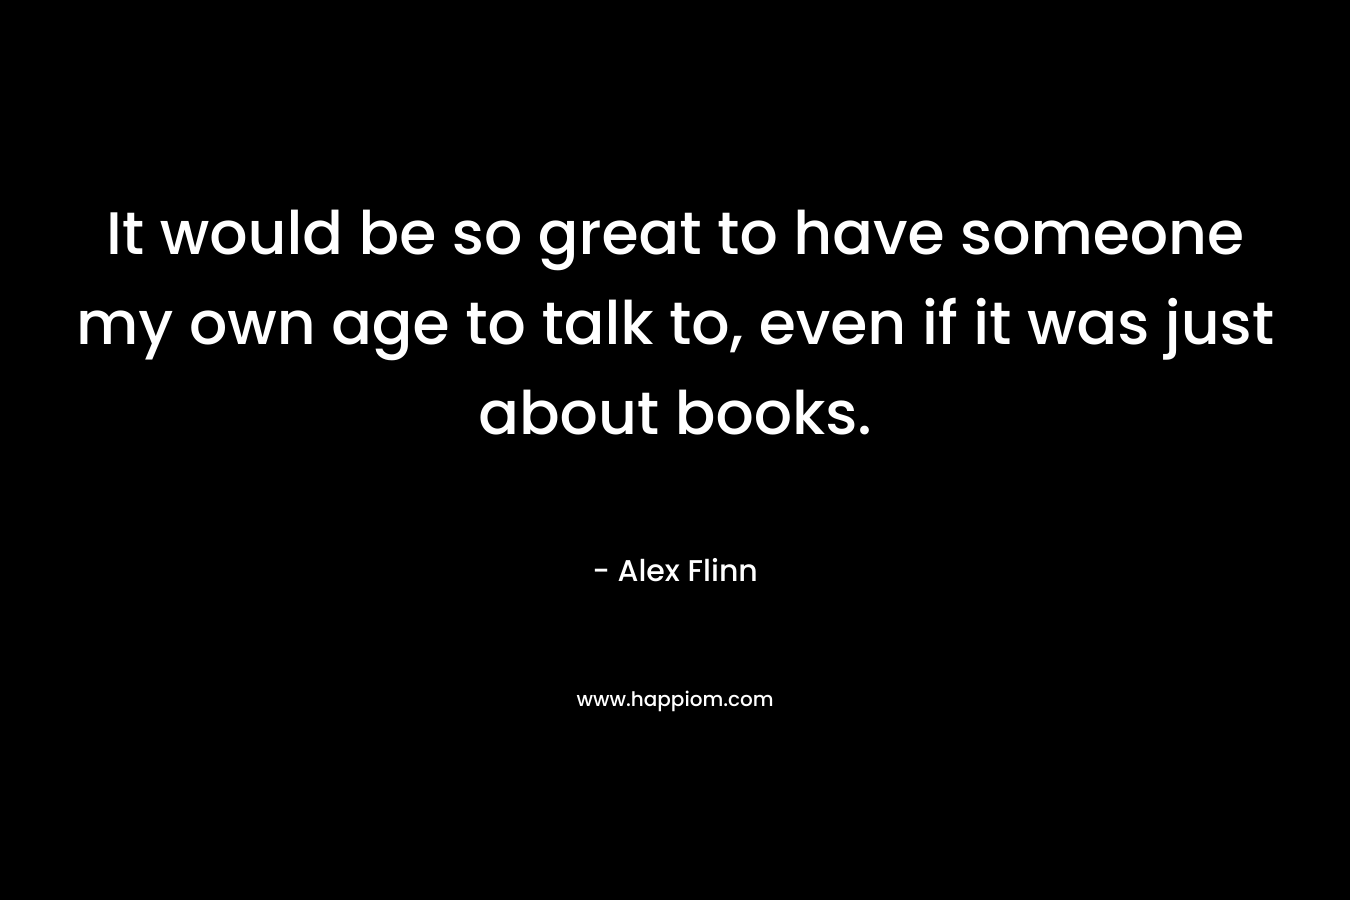 It would be so great to have someone my own age to talk to, even if it was just about books. – Alex Flinn